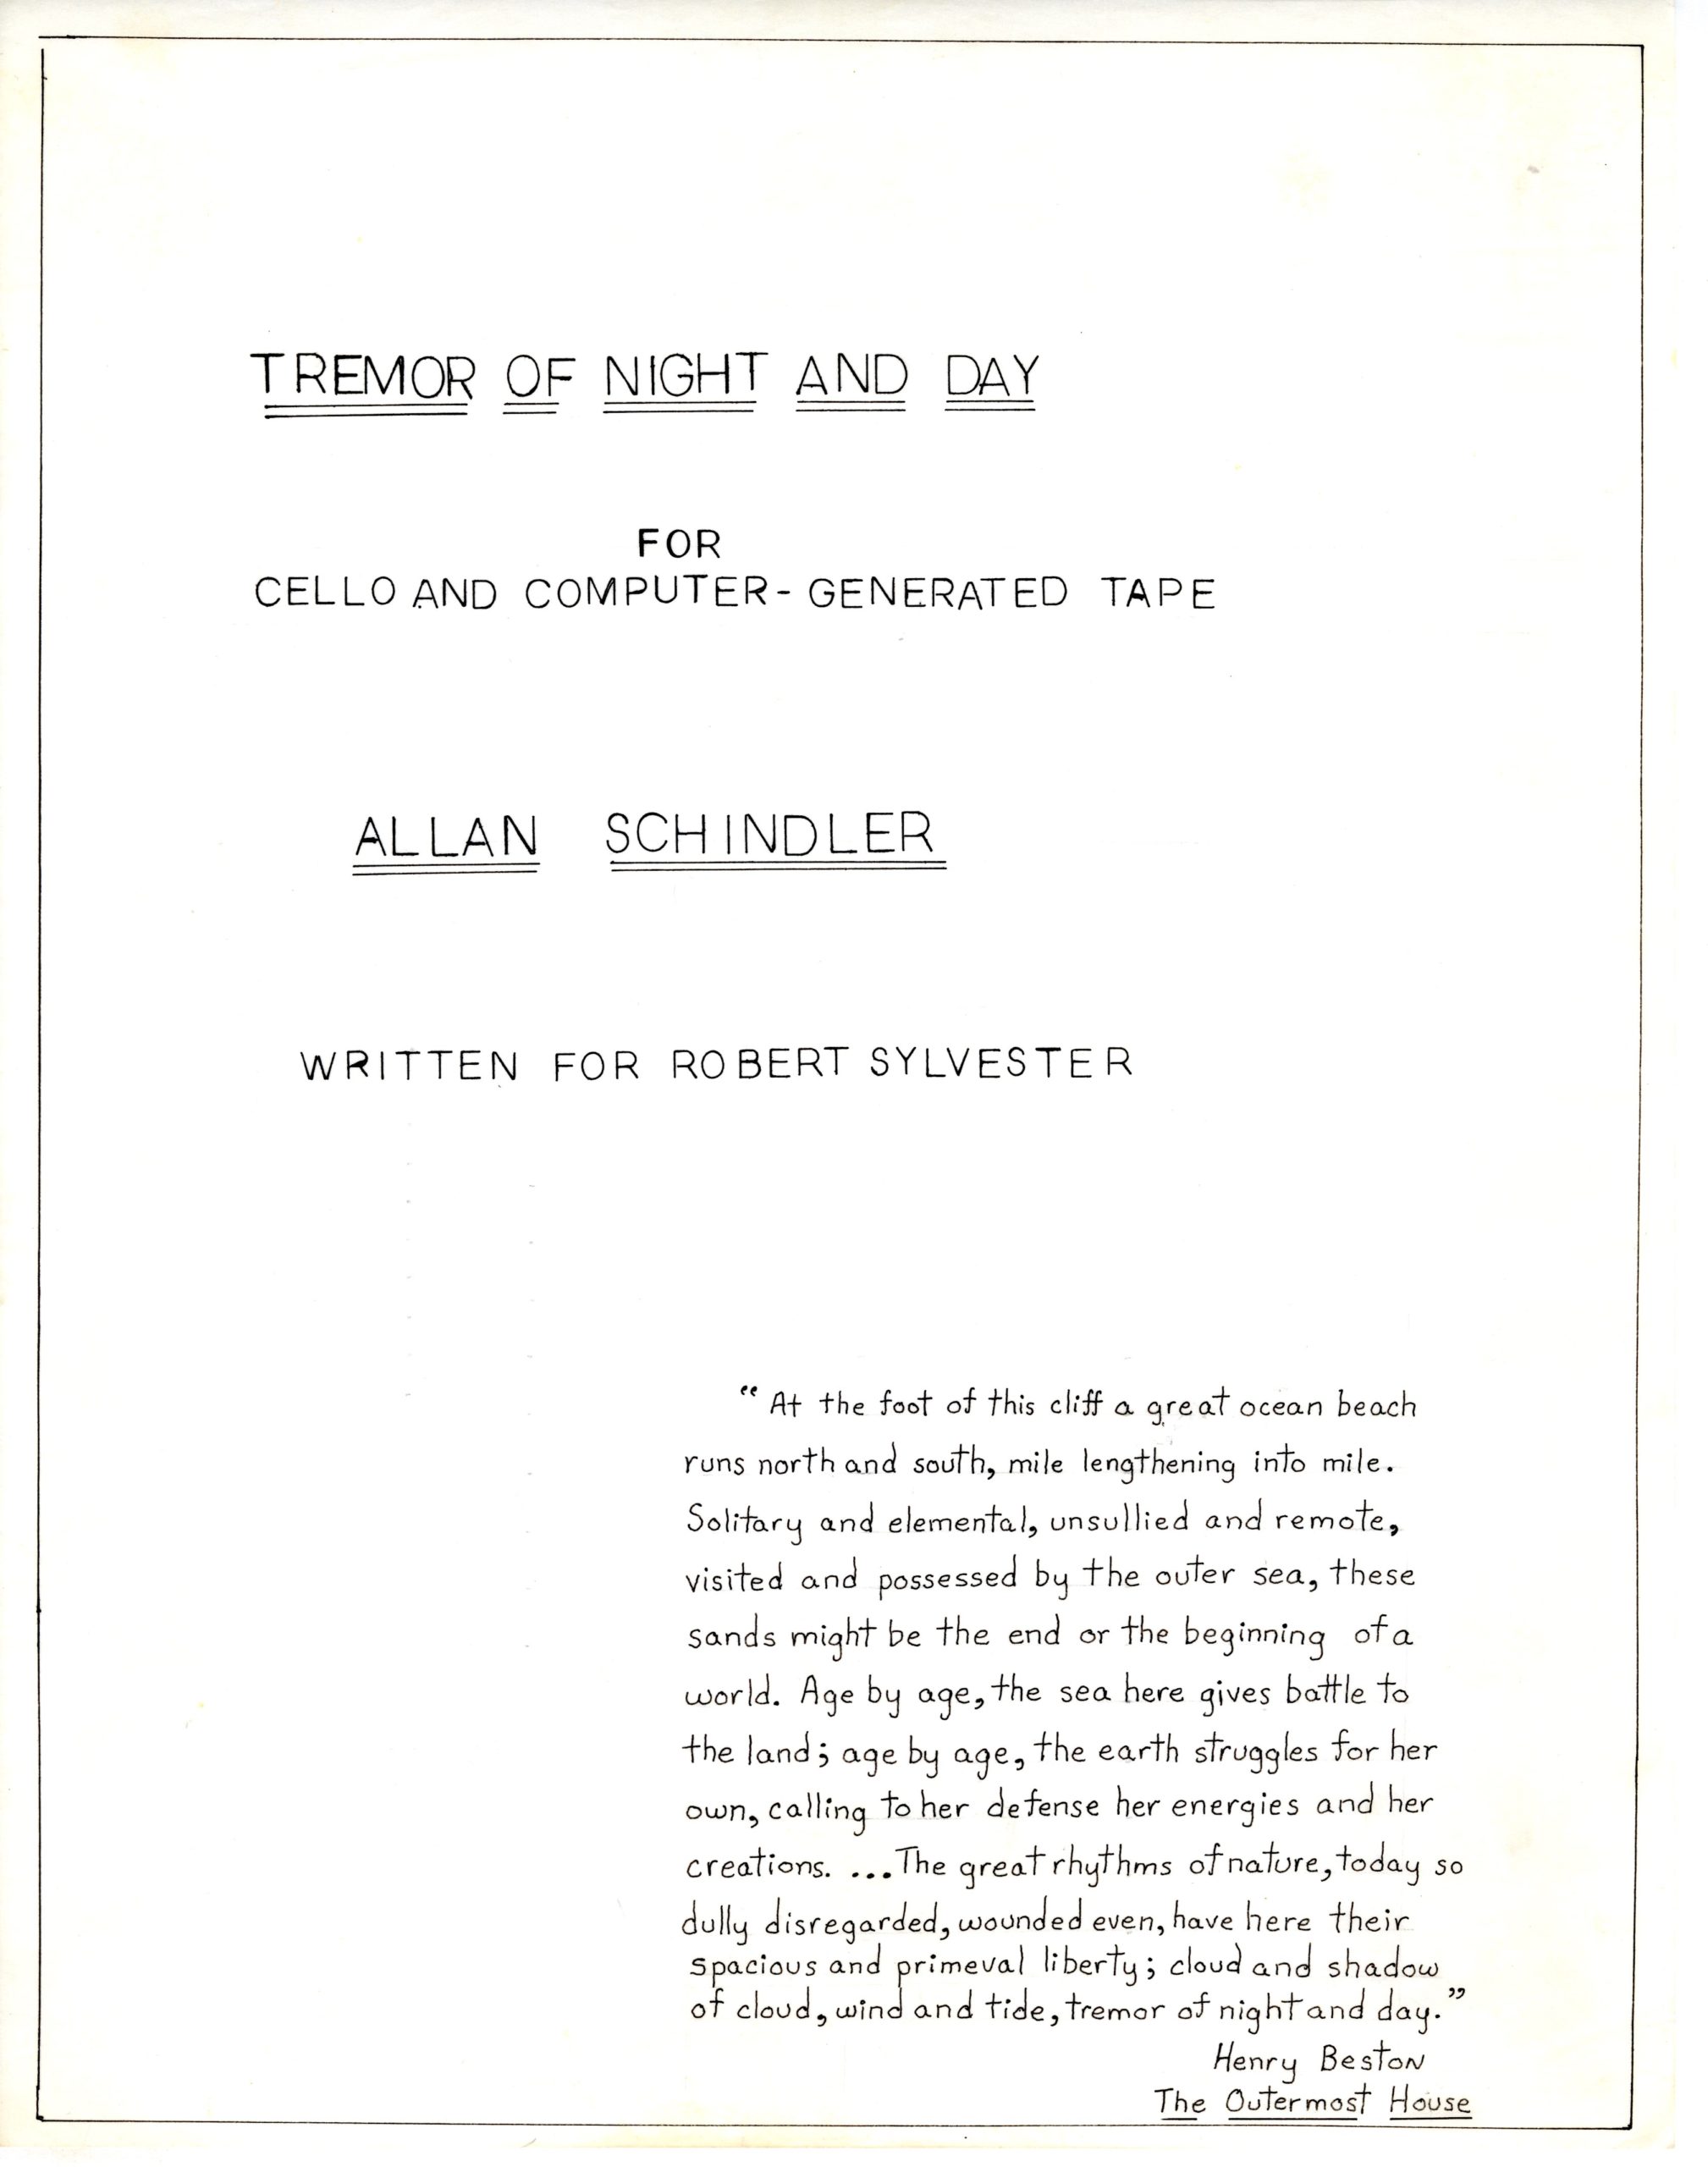 Tremor of Night and Day, ink score, title page